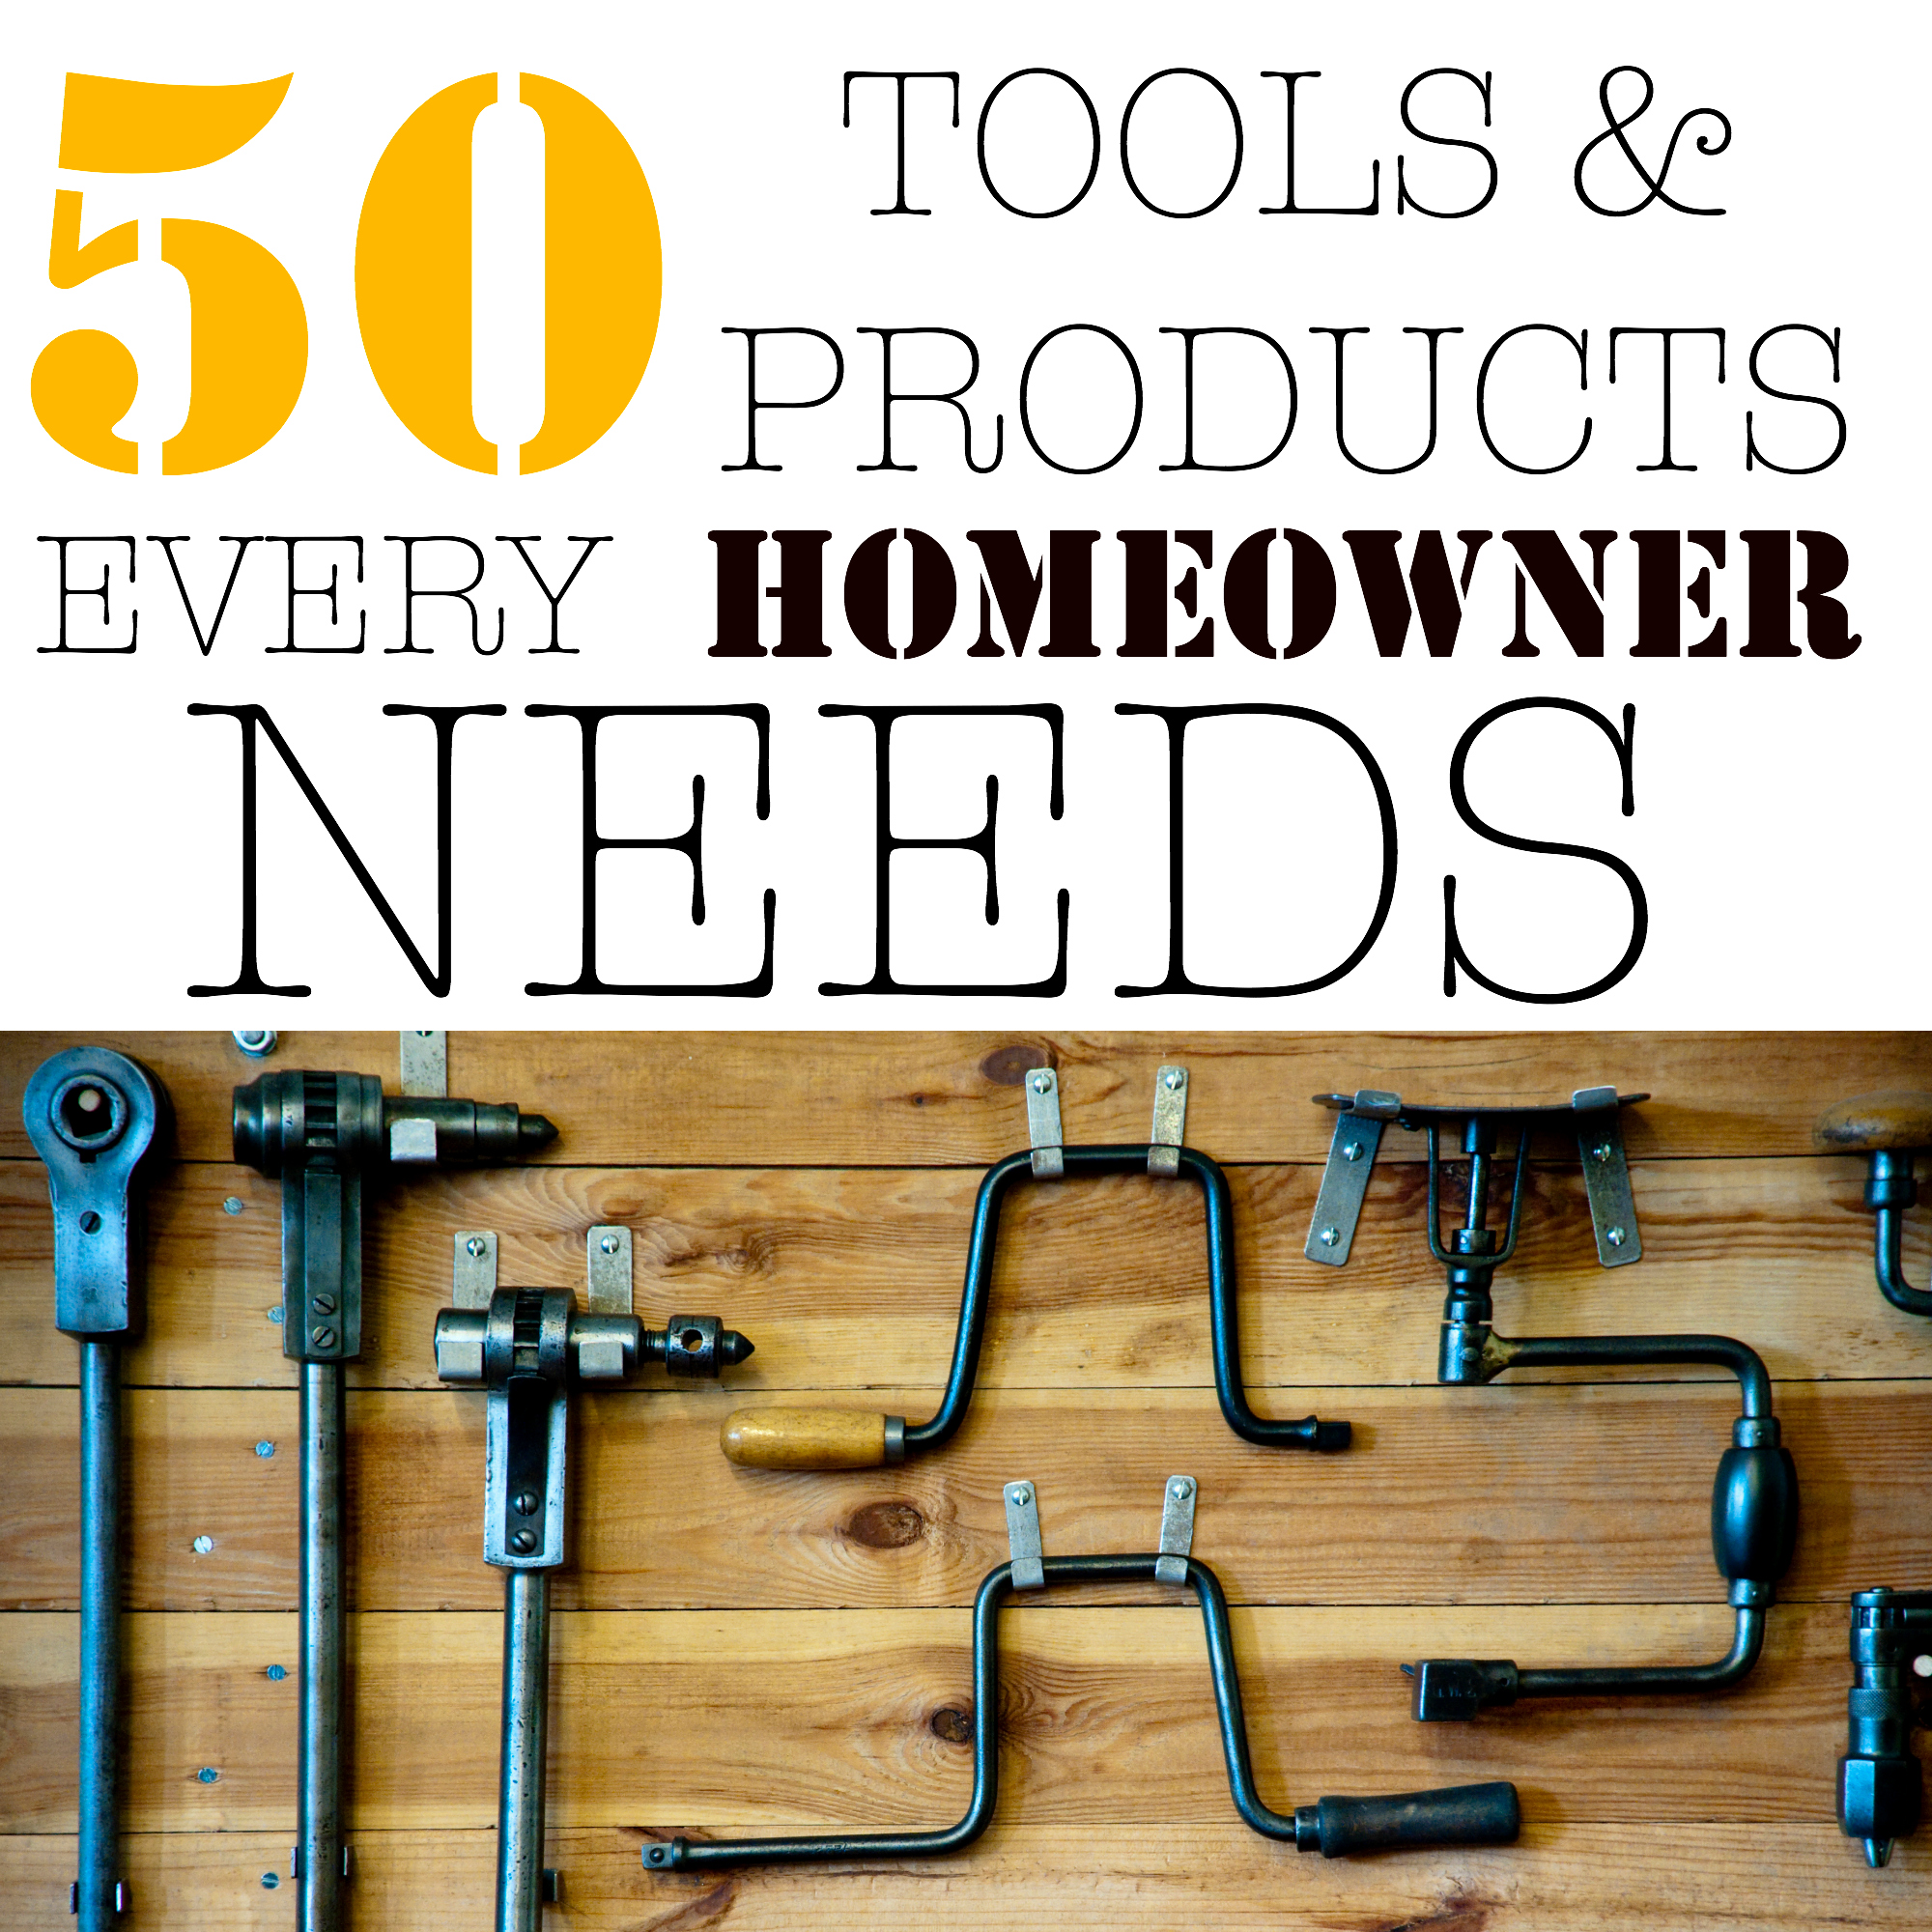 50 tools and products every homeowner needs